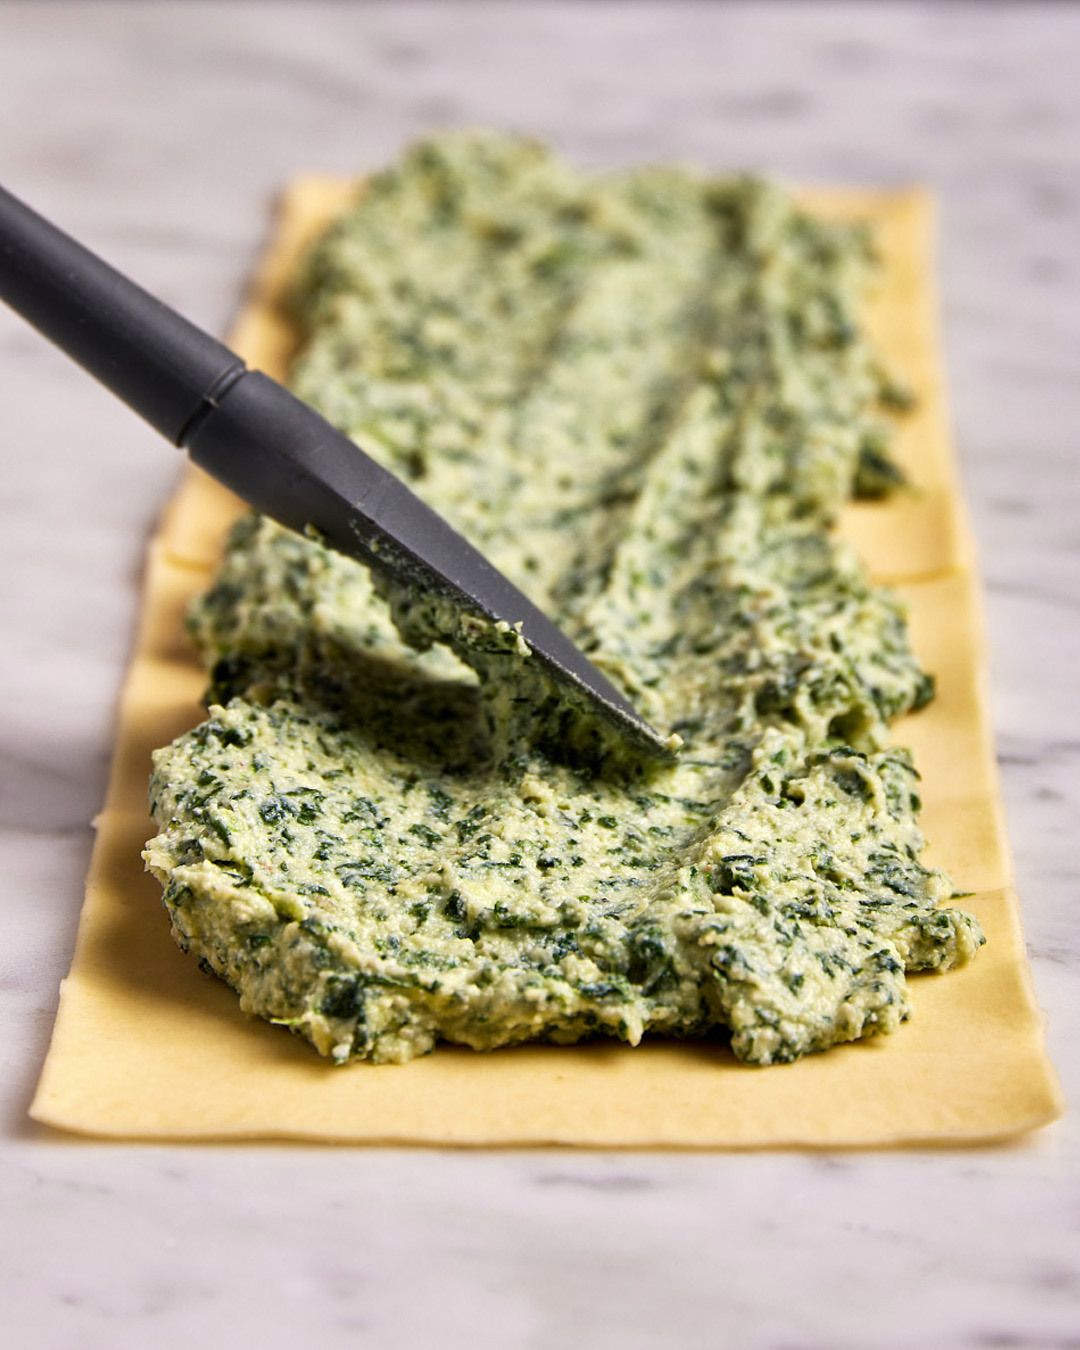 2. Place 1 cup of the ricotta-spinach filling in the center of the lasagna sheet and spread it evenly, leaving about a ½-inch border around all edges.